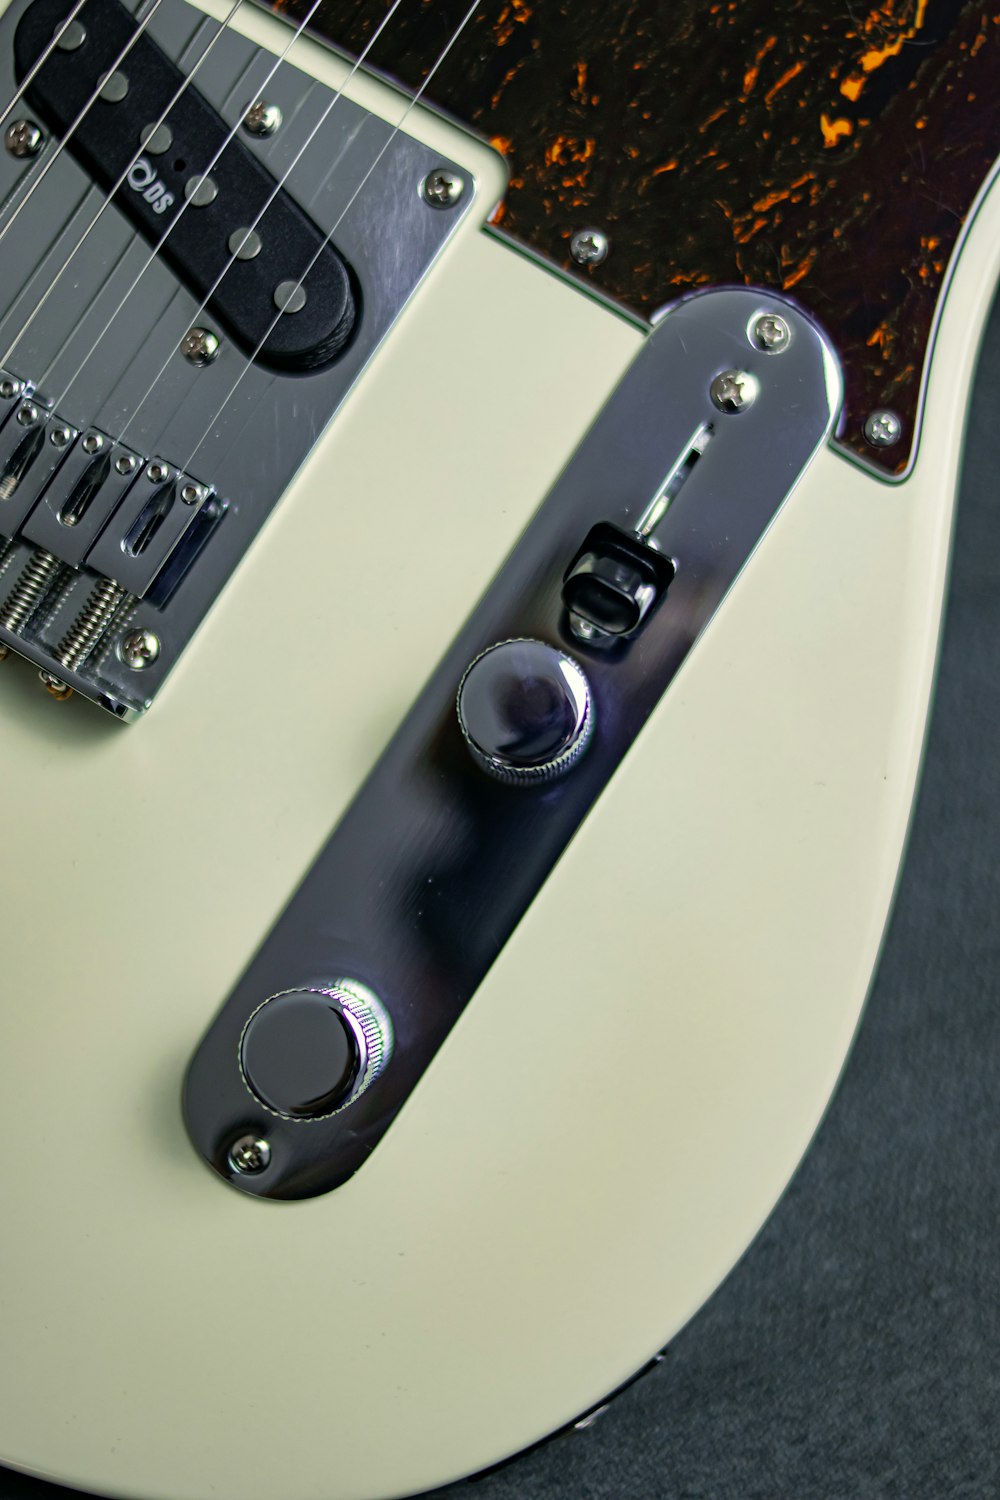 a close up of a white electric guitar